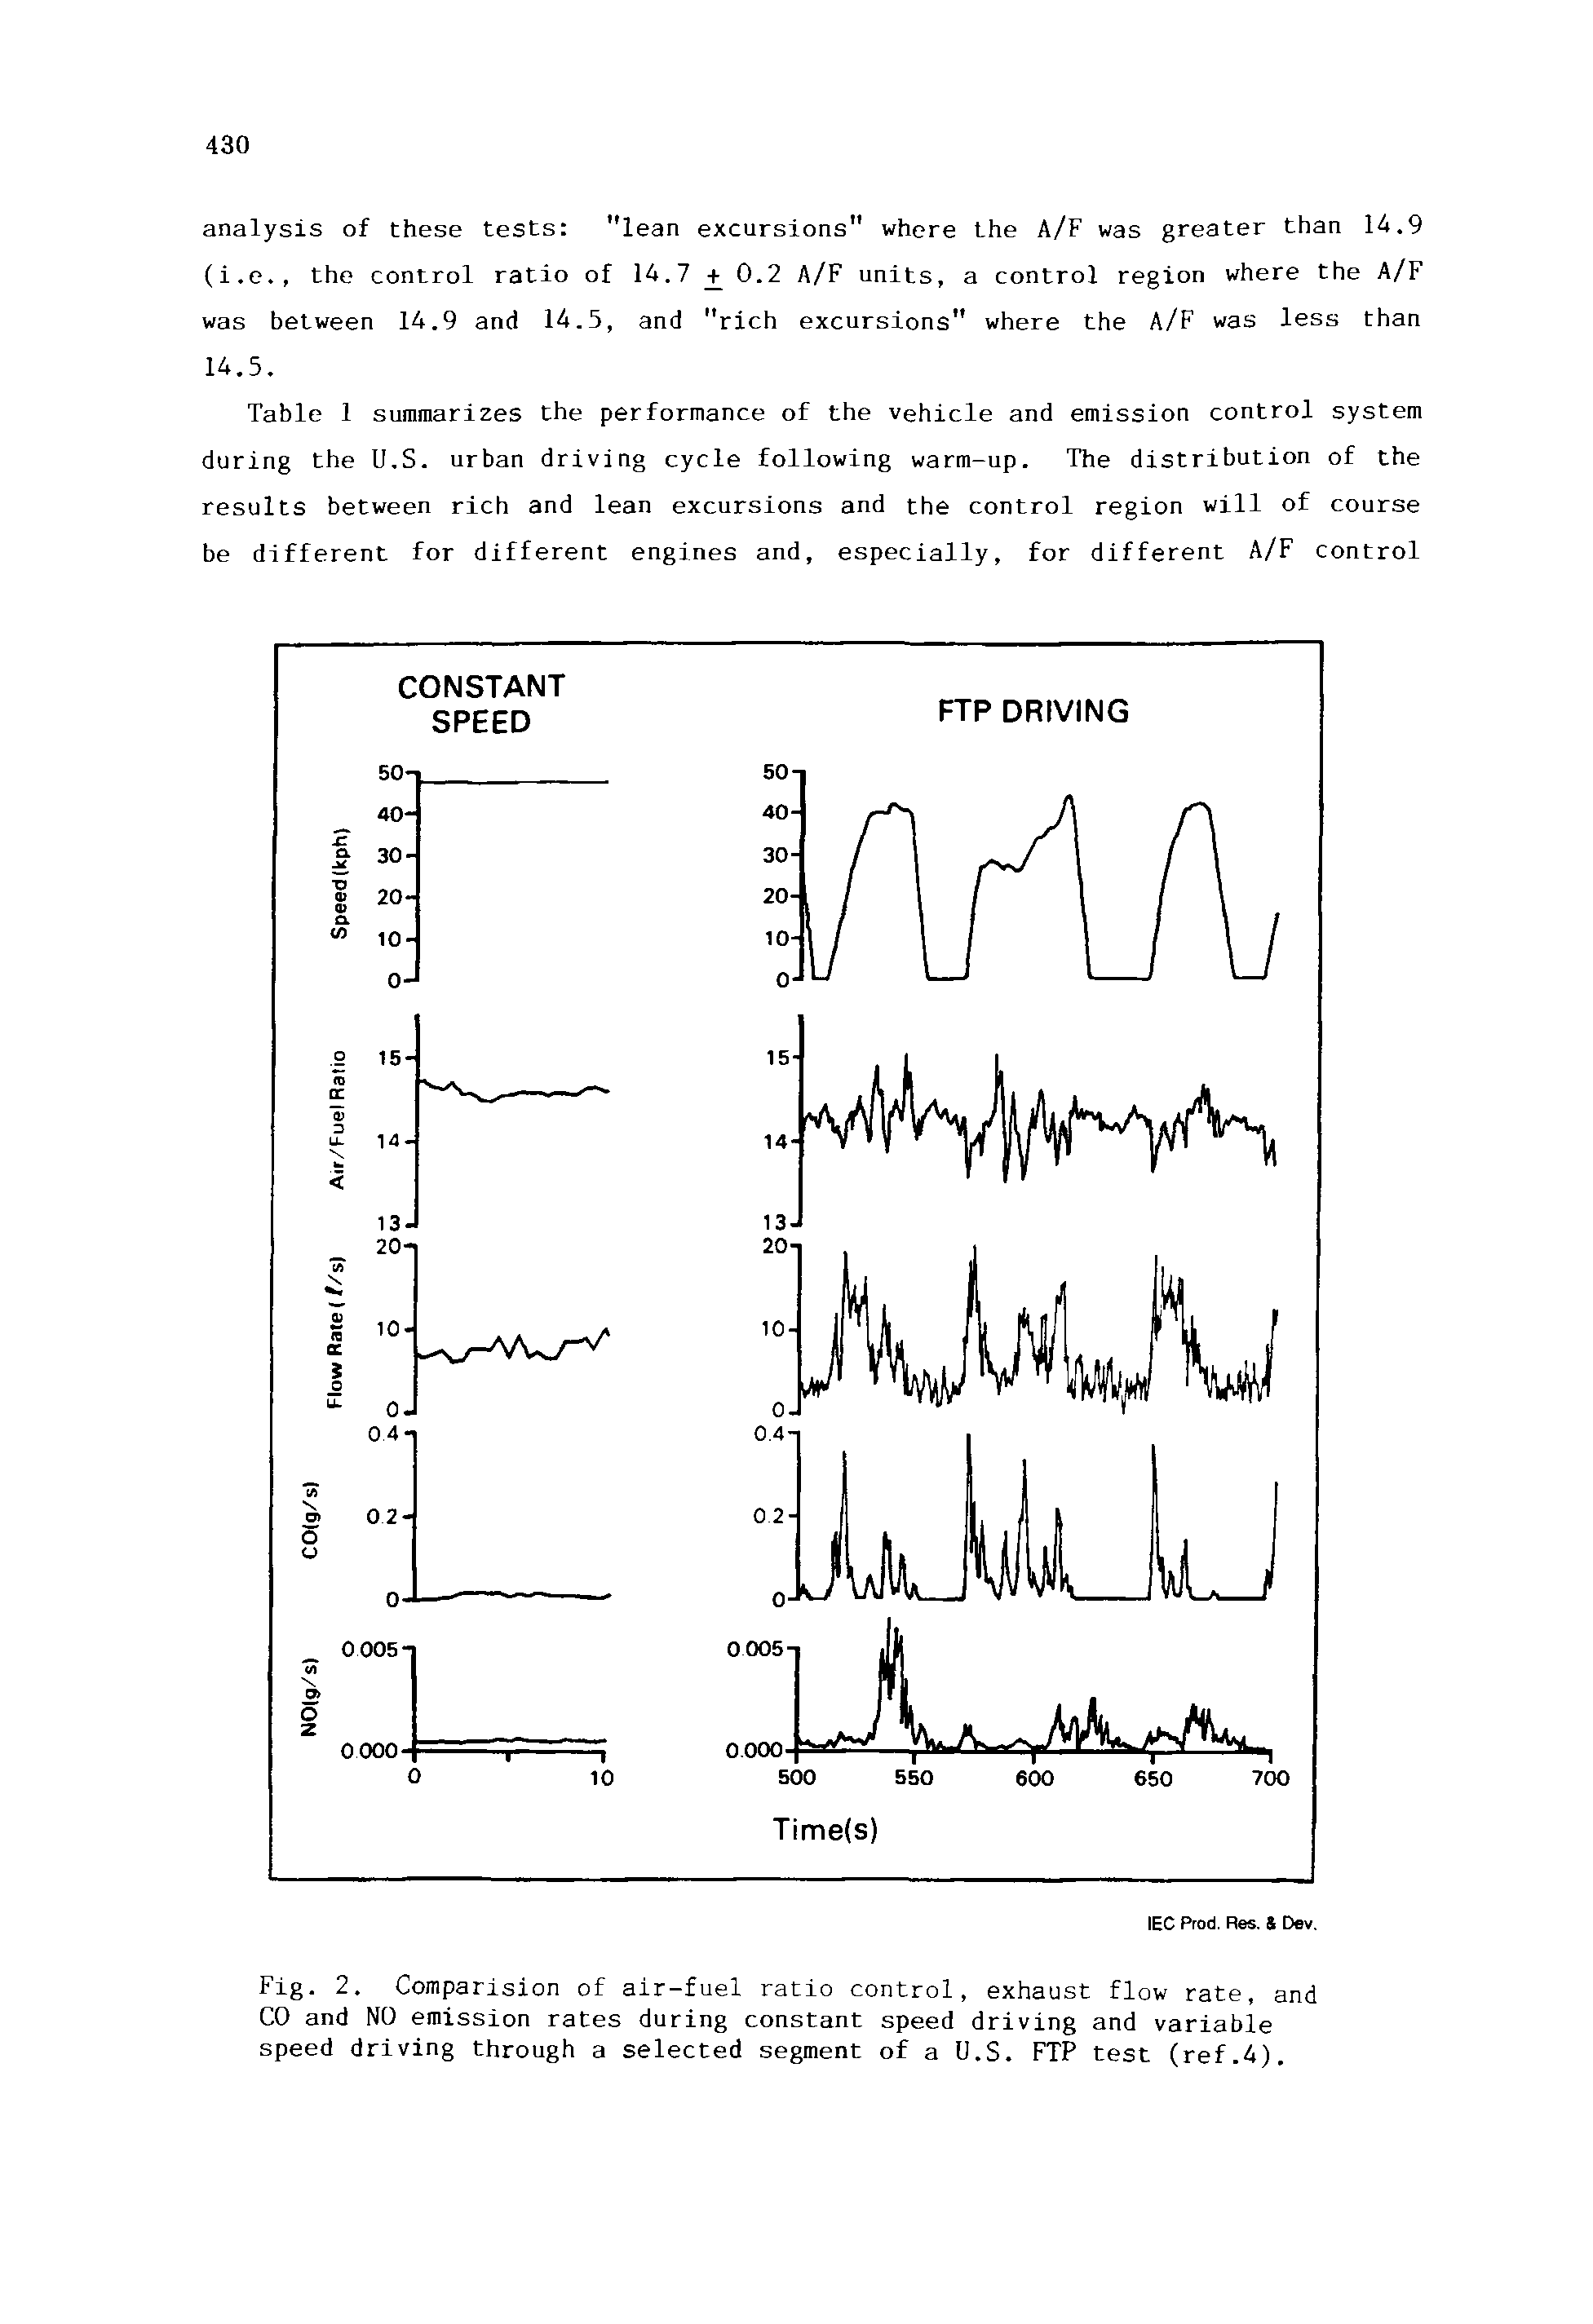 Fig. 2. Comparision of air-fuel ratio control, exhaust flow rate, and CO and NO emission rates during constant speed driving and variable speed driving through a selected segment of a U.S. FTP test (ref.4).